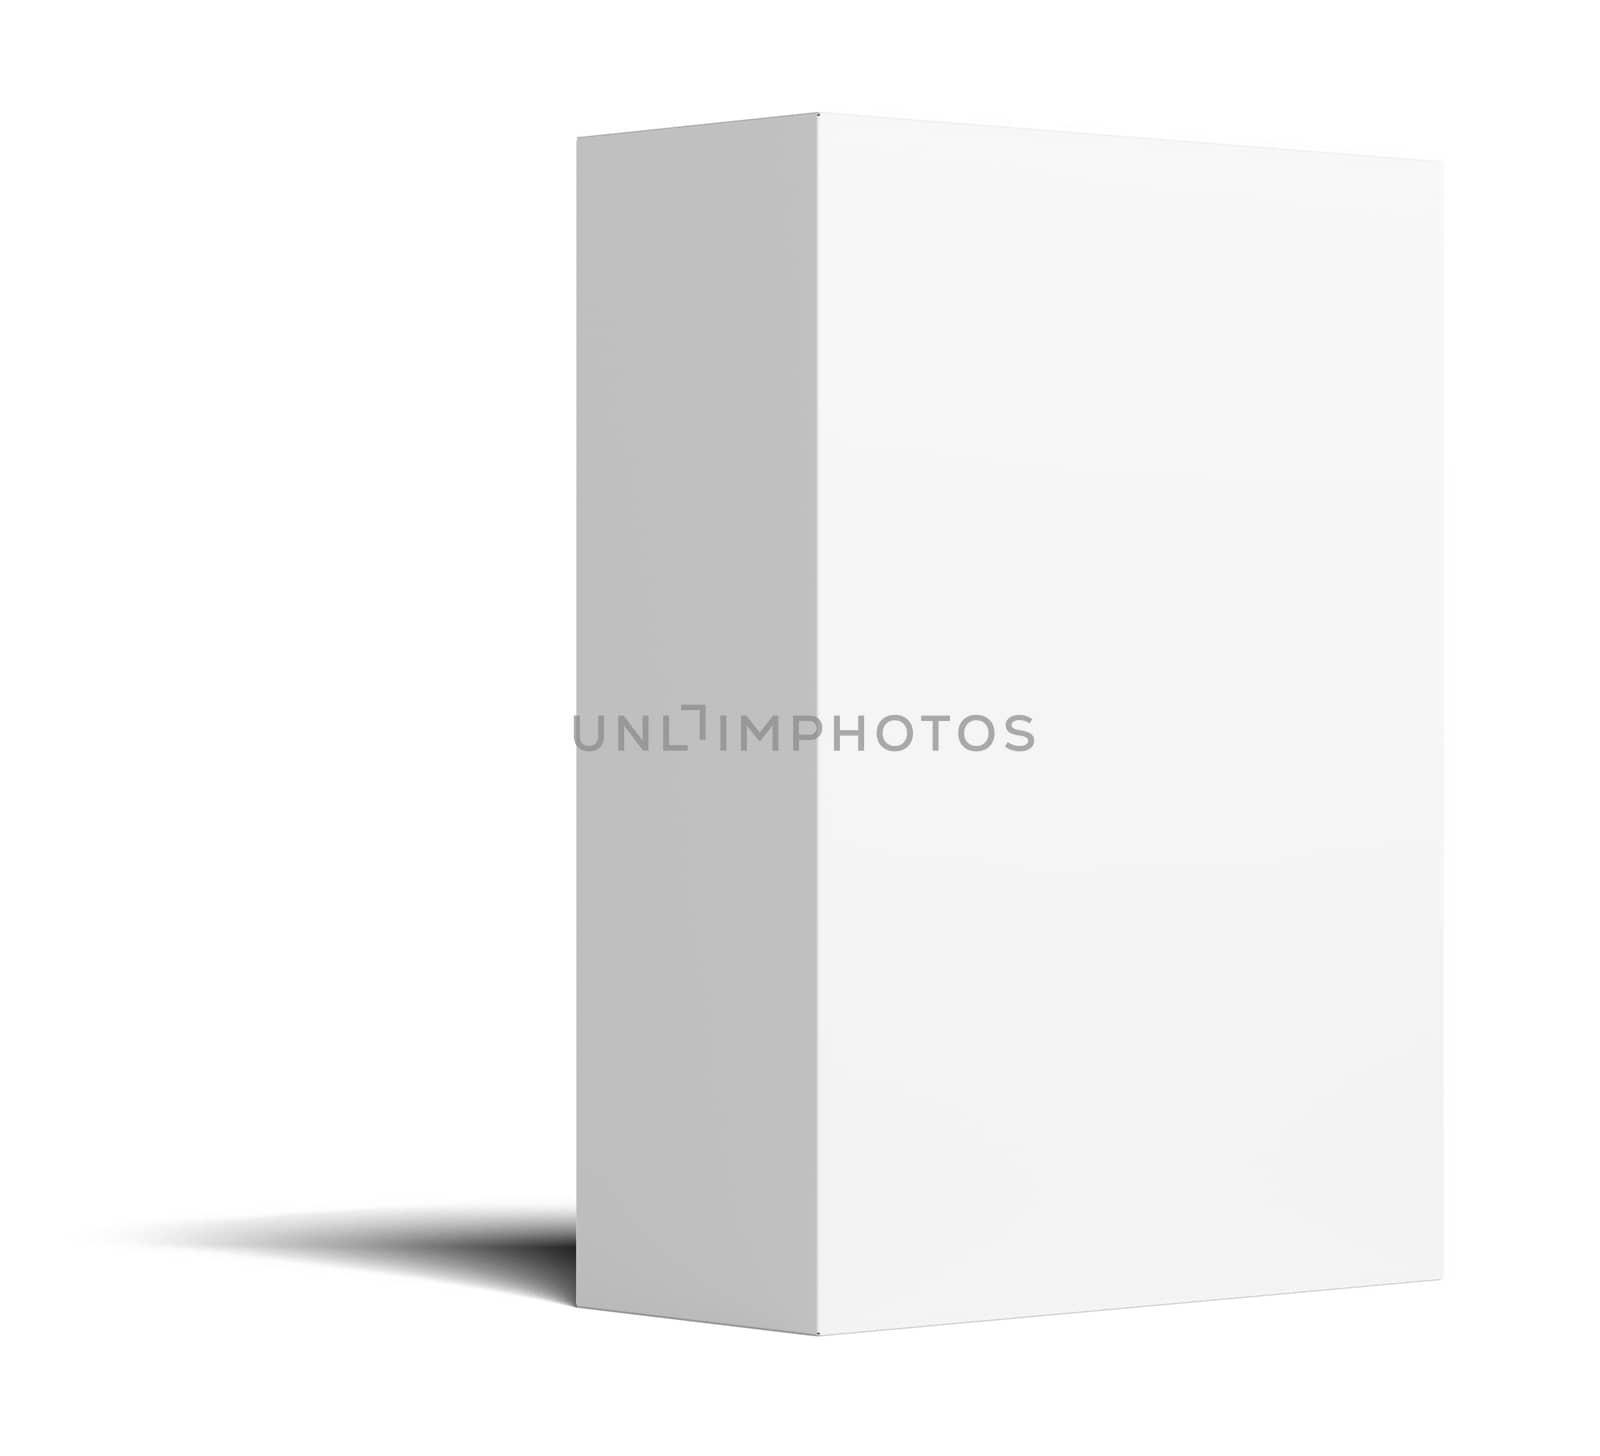 White empty vertical packing cardboard box. Isolated on white background. 3D illustration